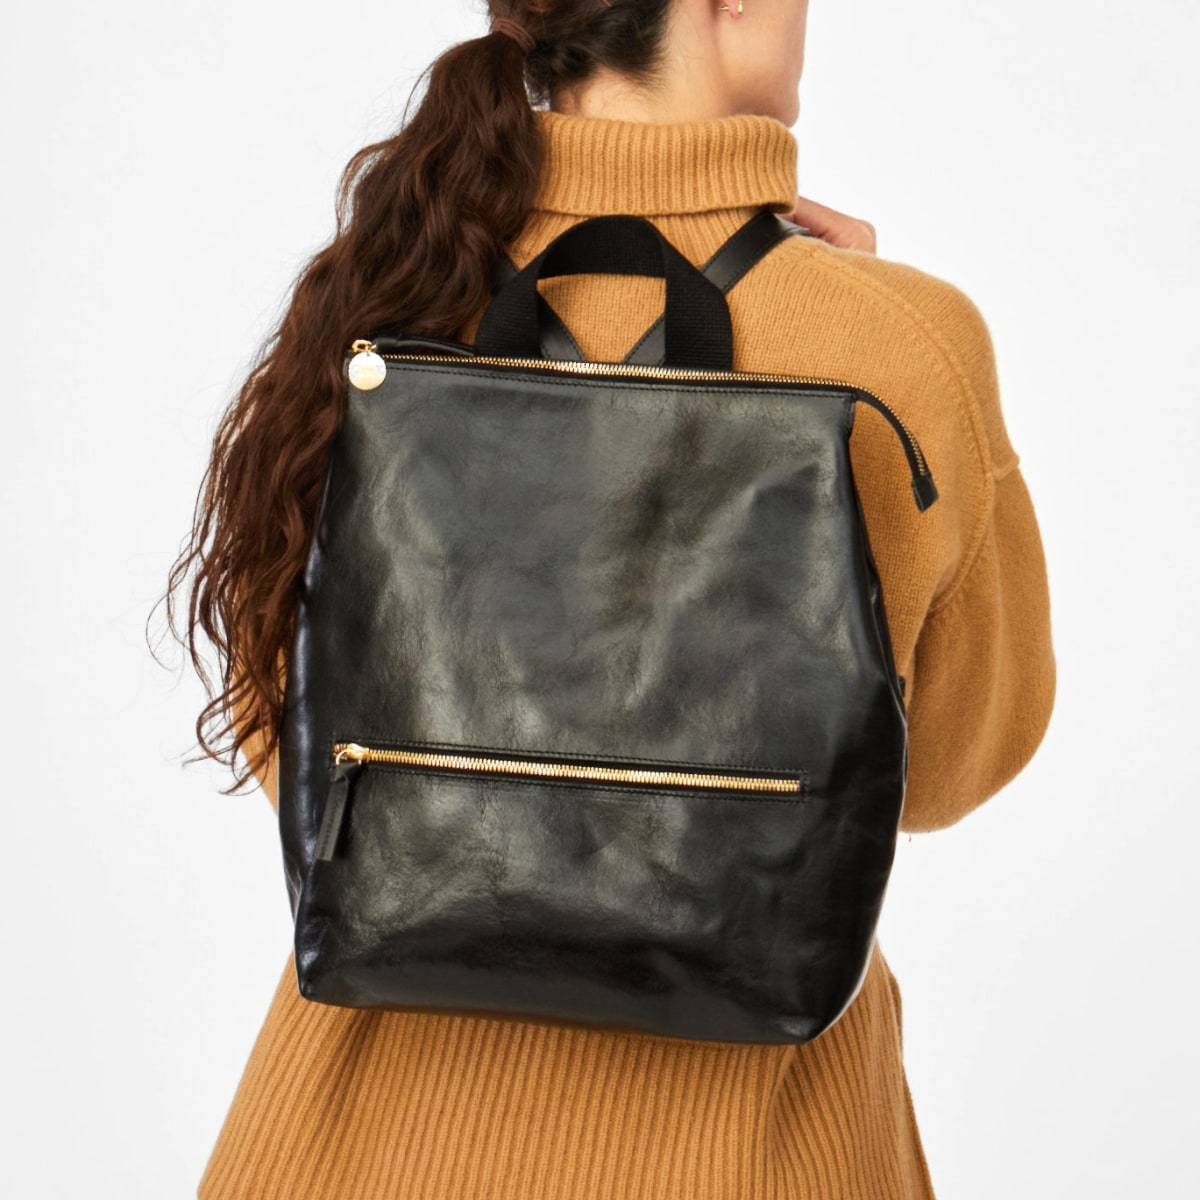 Five New Back-To-Work Bags To Have On Your Radar - MOJEH